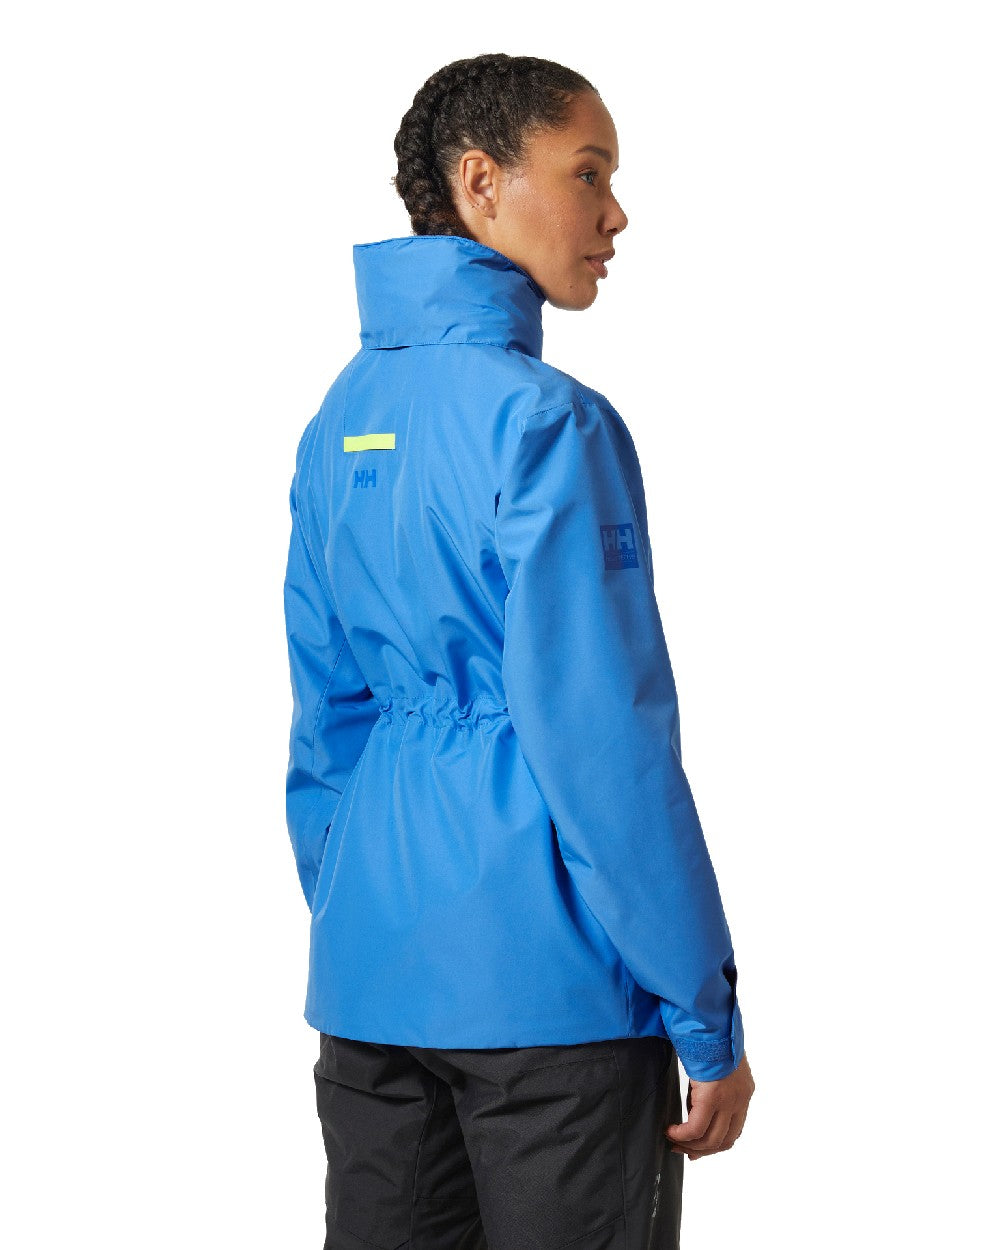 Ultra Blue coloured Helly Hansen Womens HP Racing Sailing Jacket 2.0 on white background 